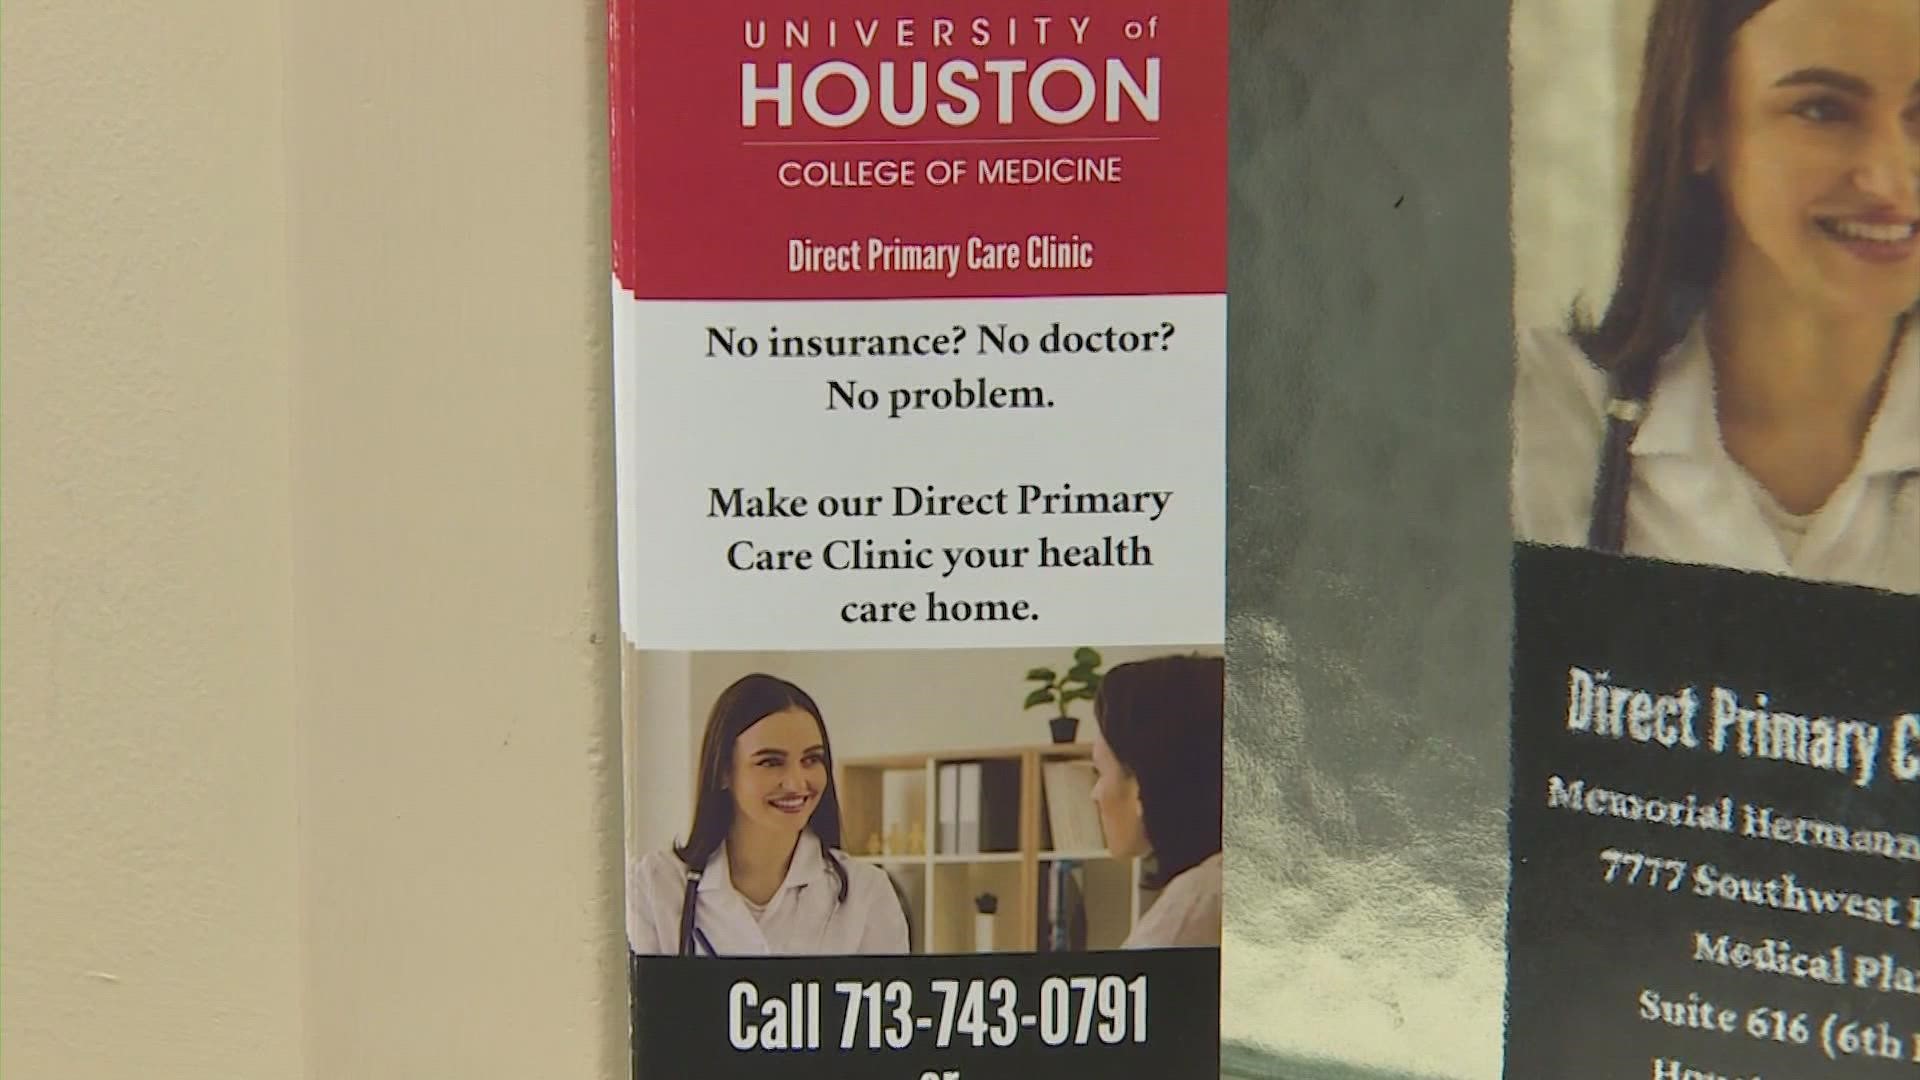 No insurance? No doctor? No problem. For $60 a month, the University of Houston College of Medicine Direct Primary Care Clinic is open to you.